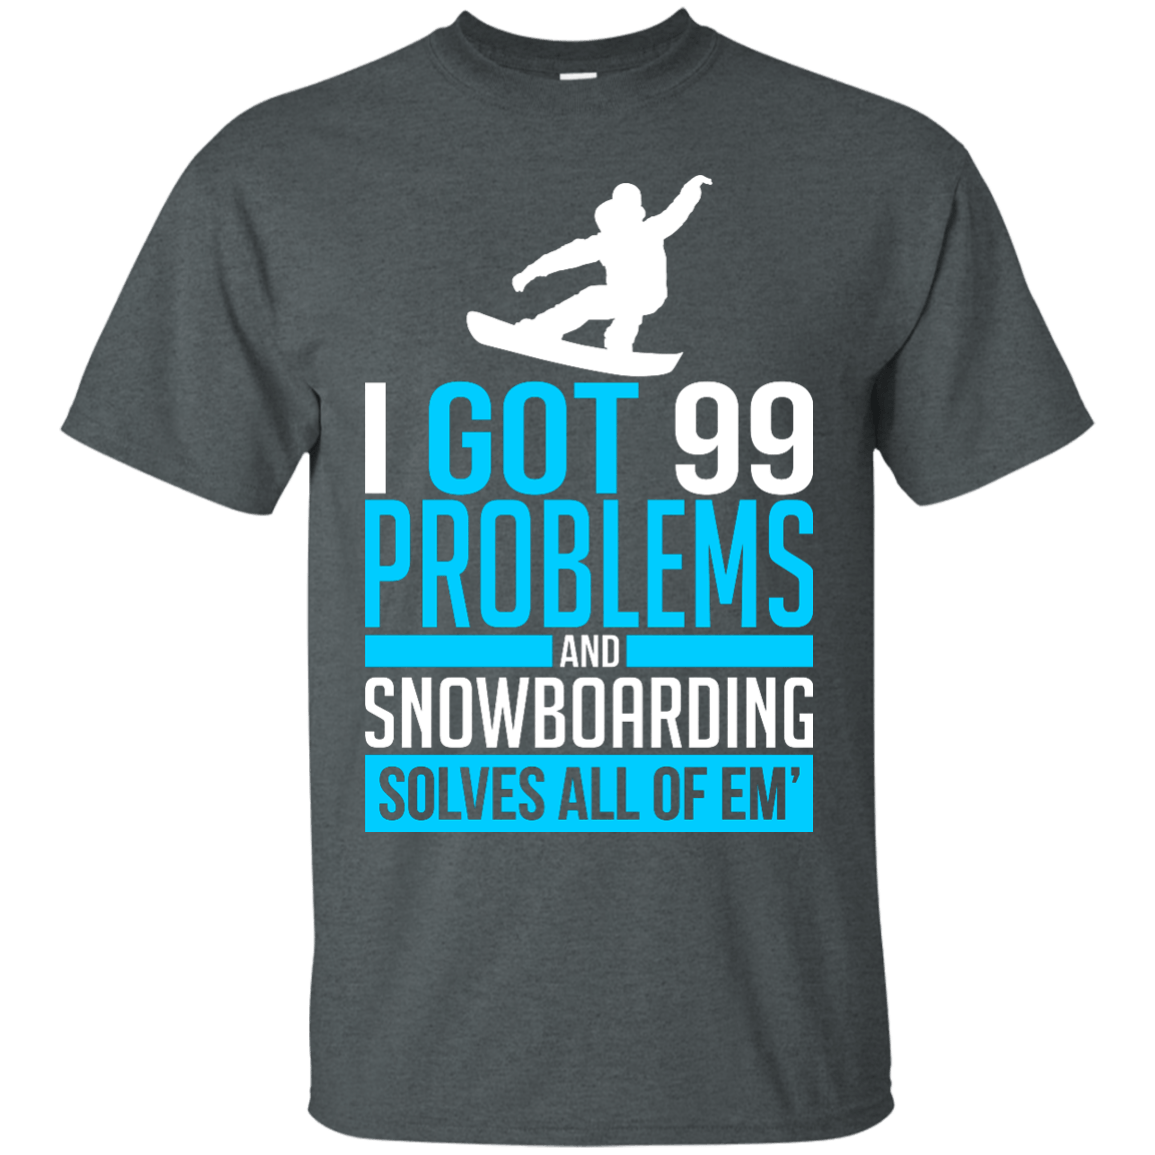 I Got 99 Problems And Snowboarding Solves All Of Em Tees - Powderaddicts